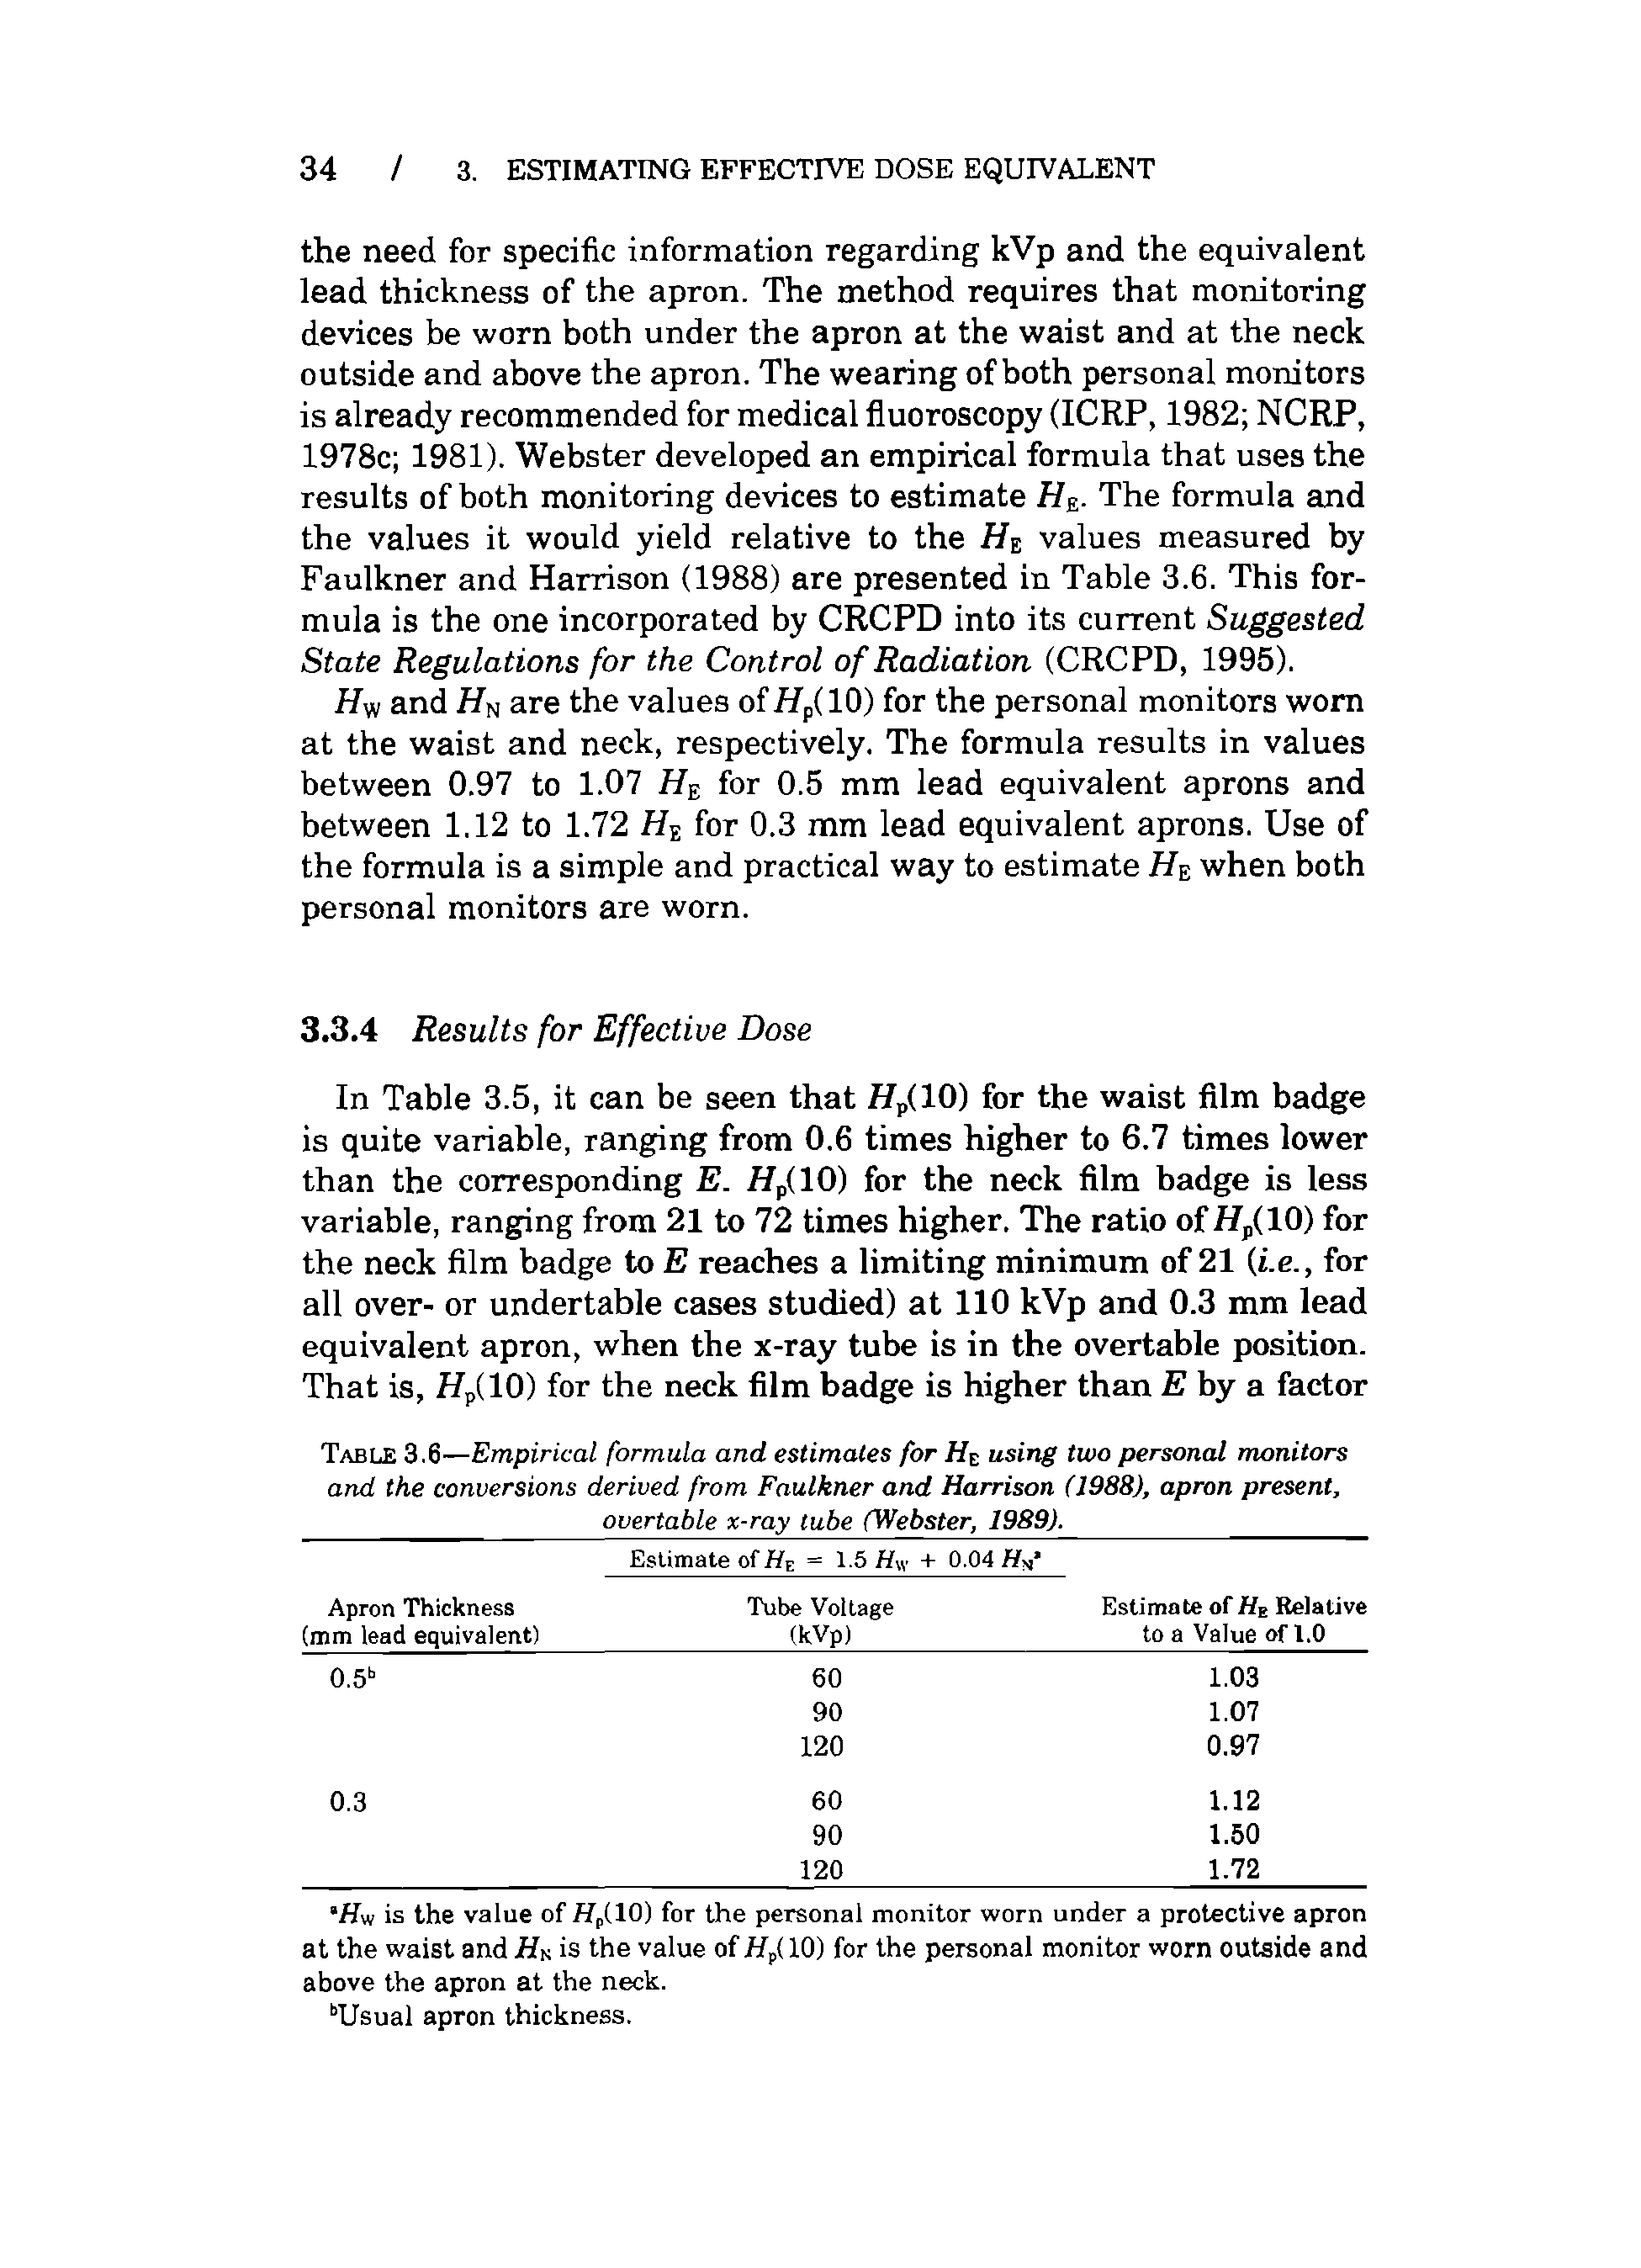 Table 3.6—Empirical formula and estimates for He using two personal monitors and the conversions derived from Faulkner and Harrison (1988), apron present, avertable x-ray tube (Webster, 1989).